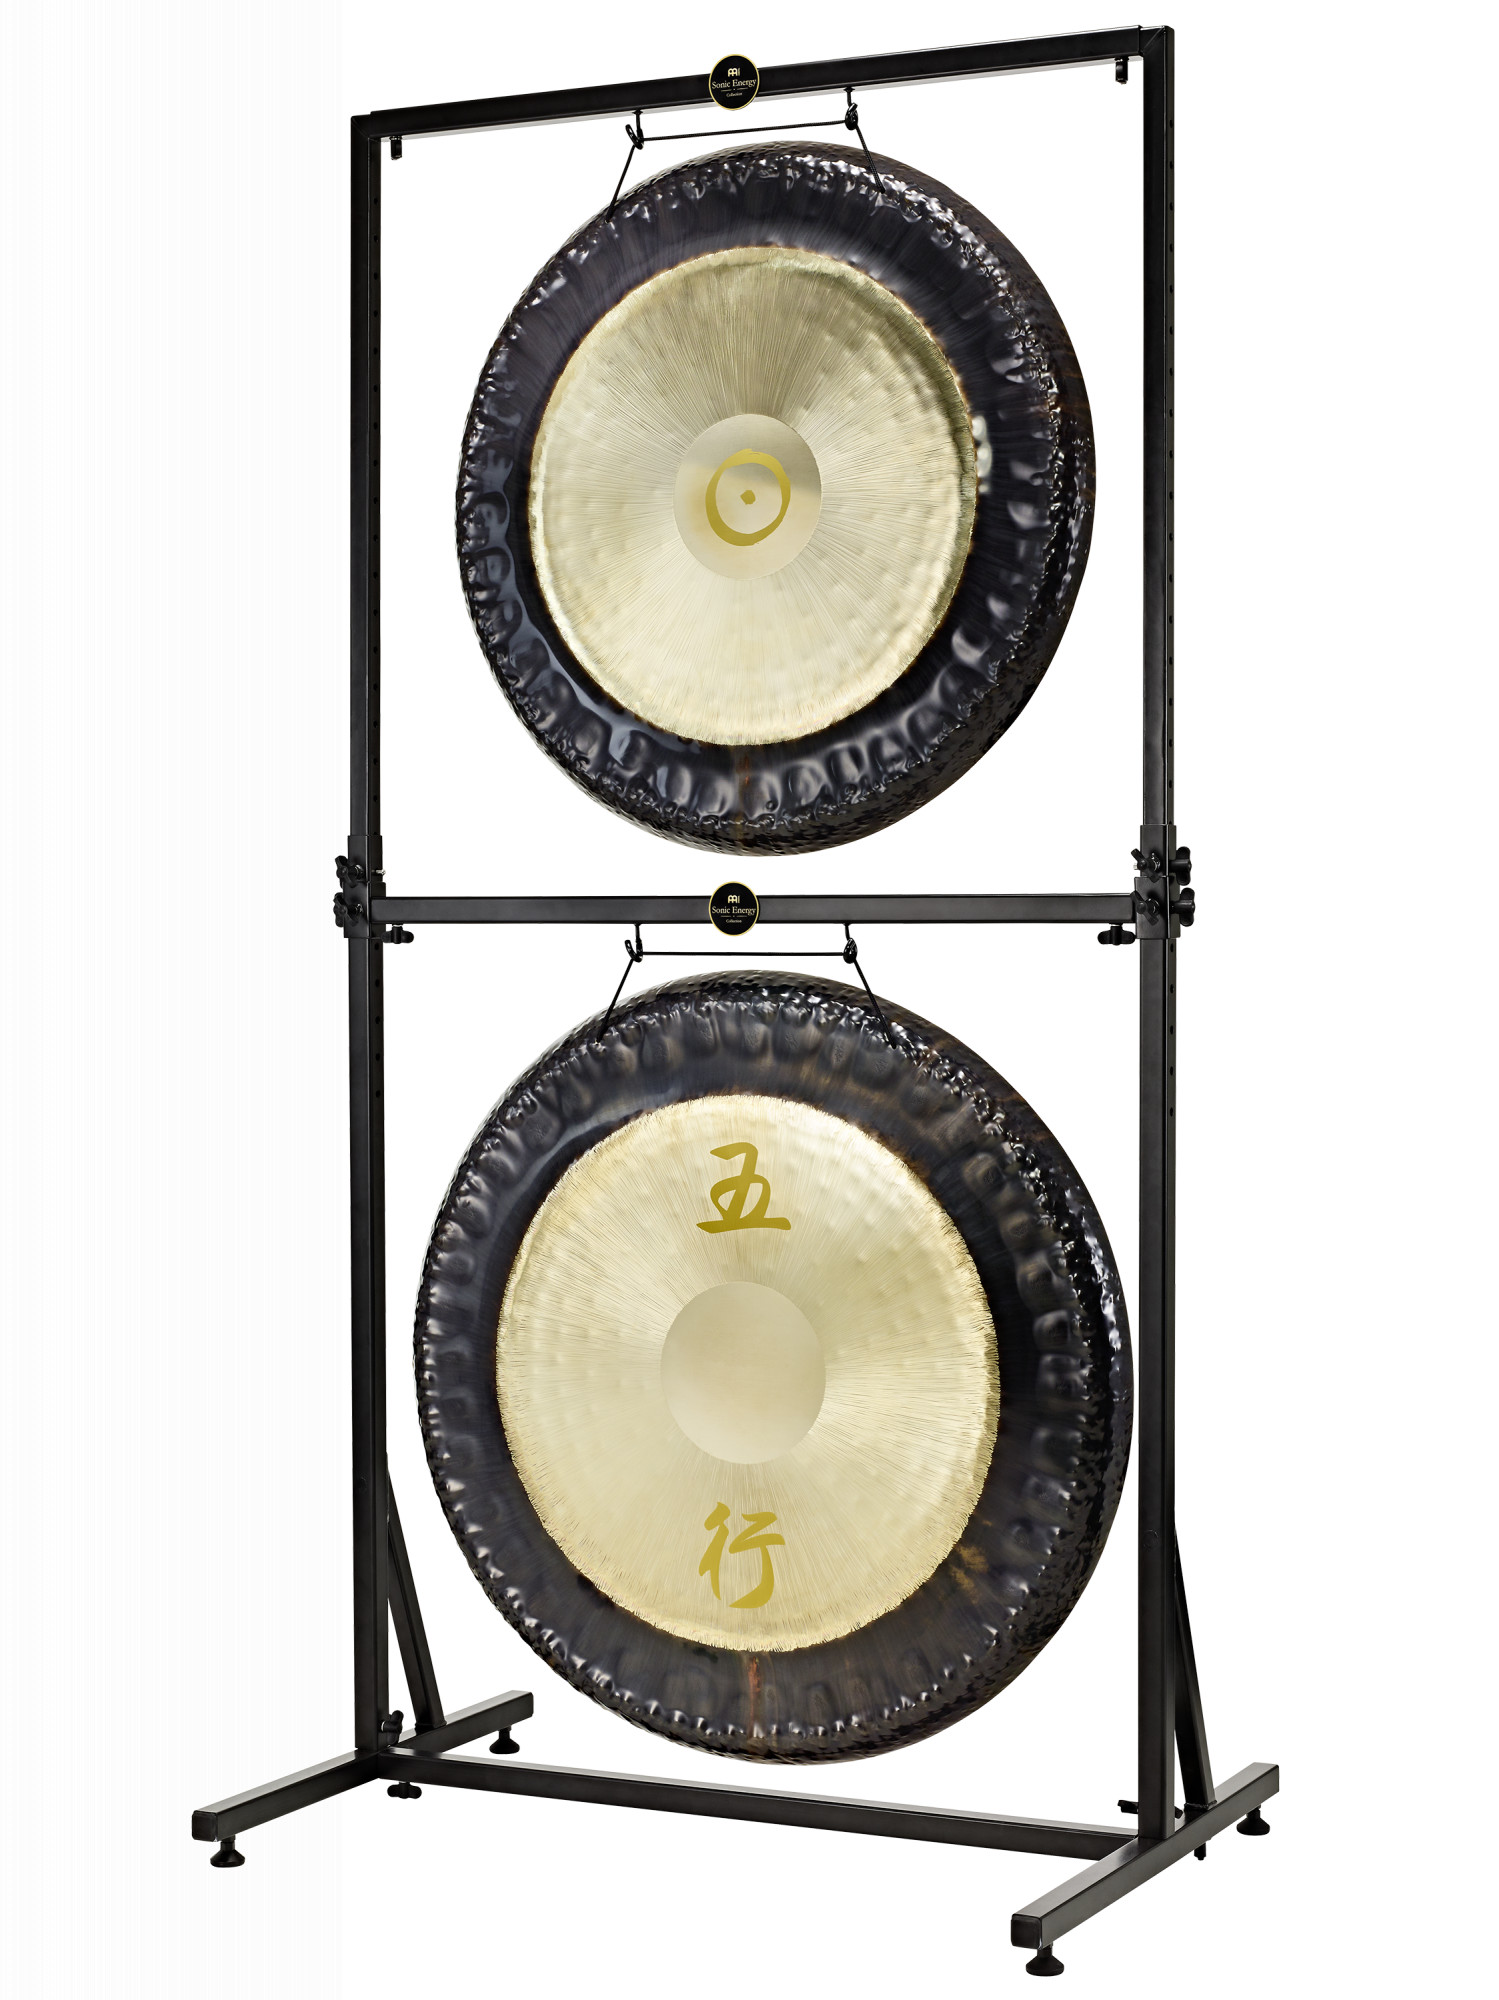 Meinl 22 Indian Premium Gong on TMTGS-L Stand